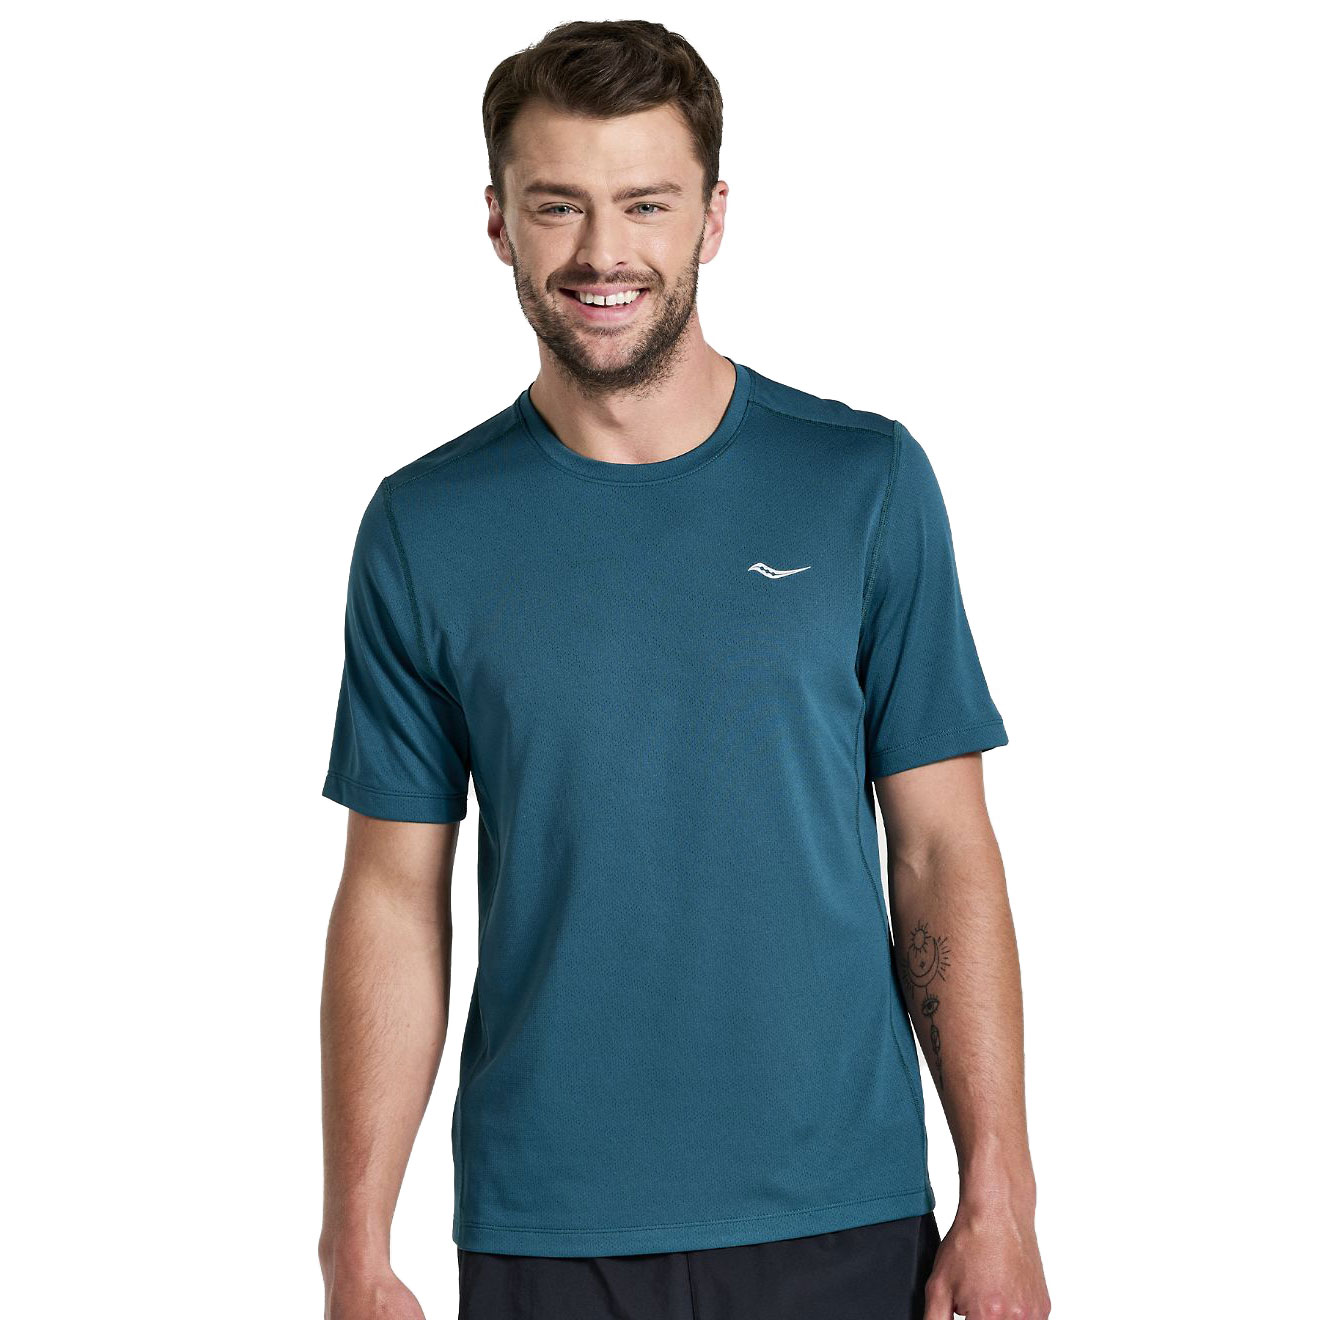 Picture of Saucony Stopwatch Short Sleeve Shirt - lagoon